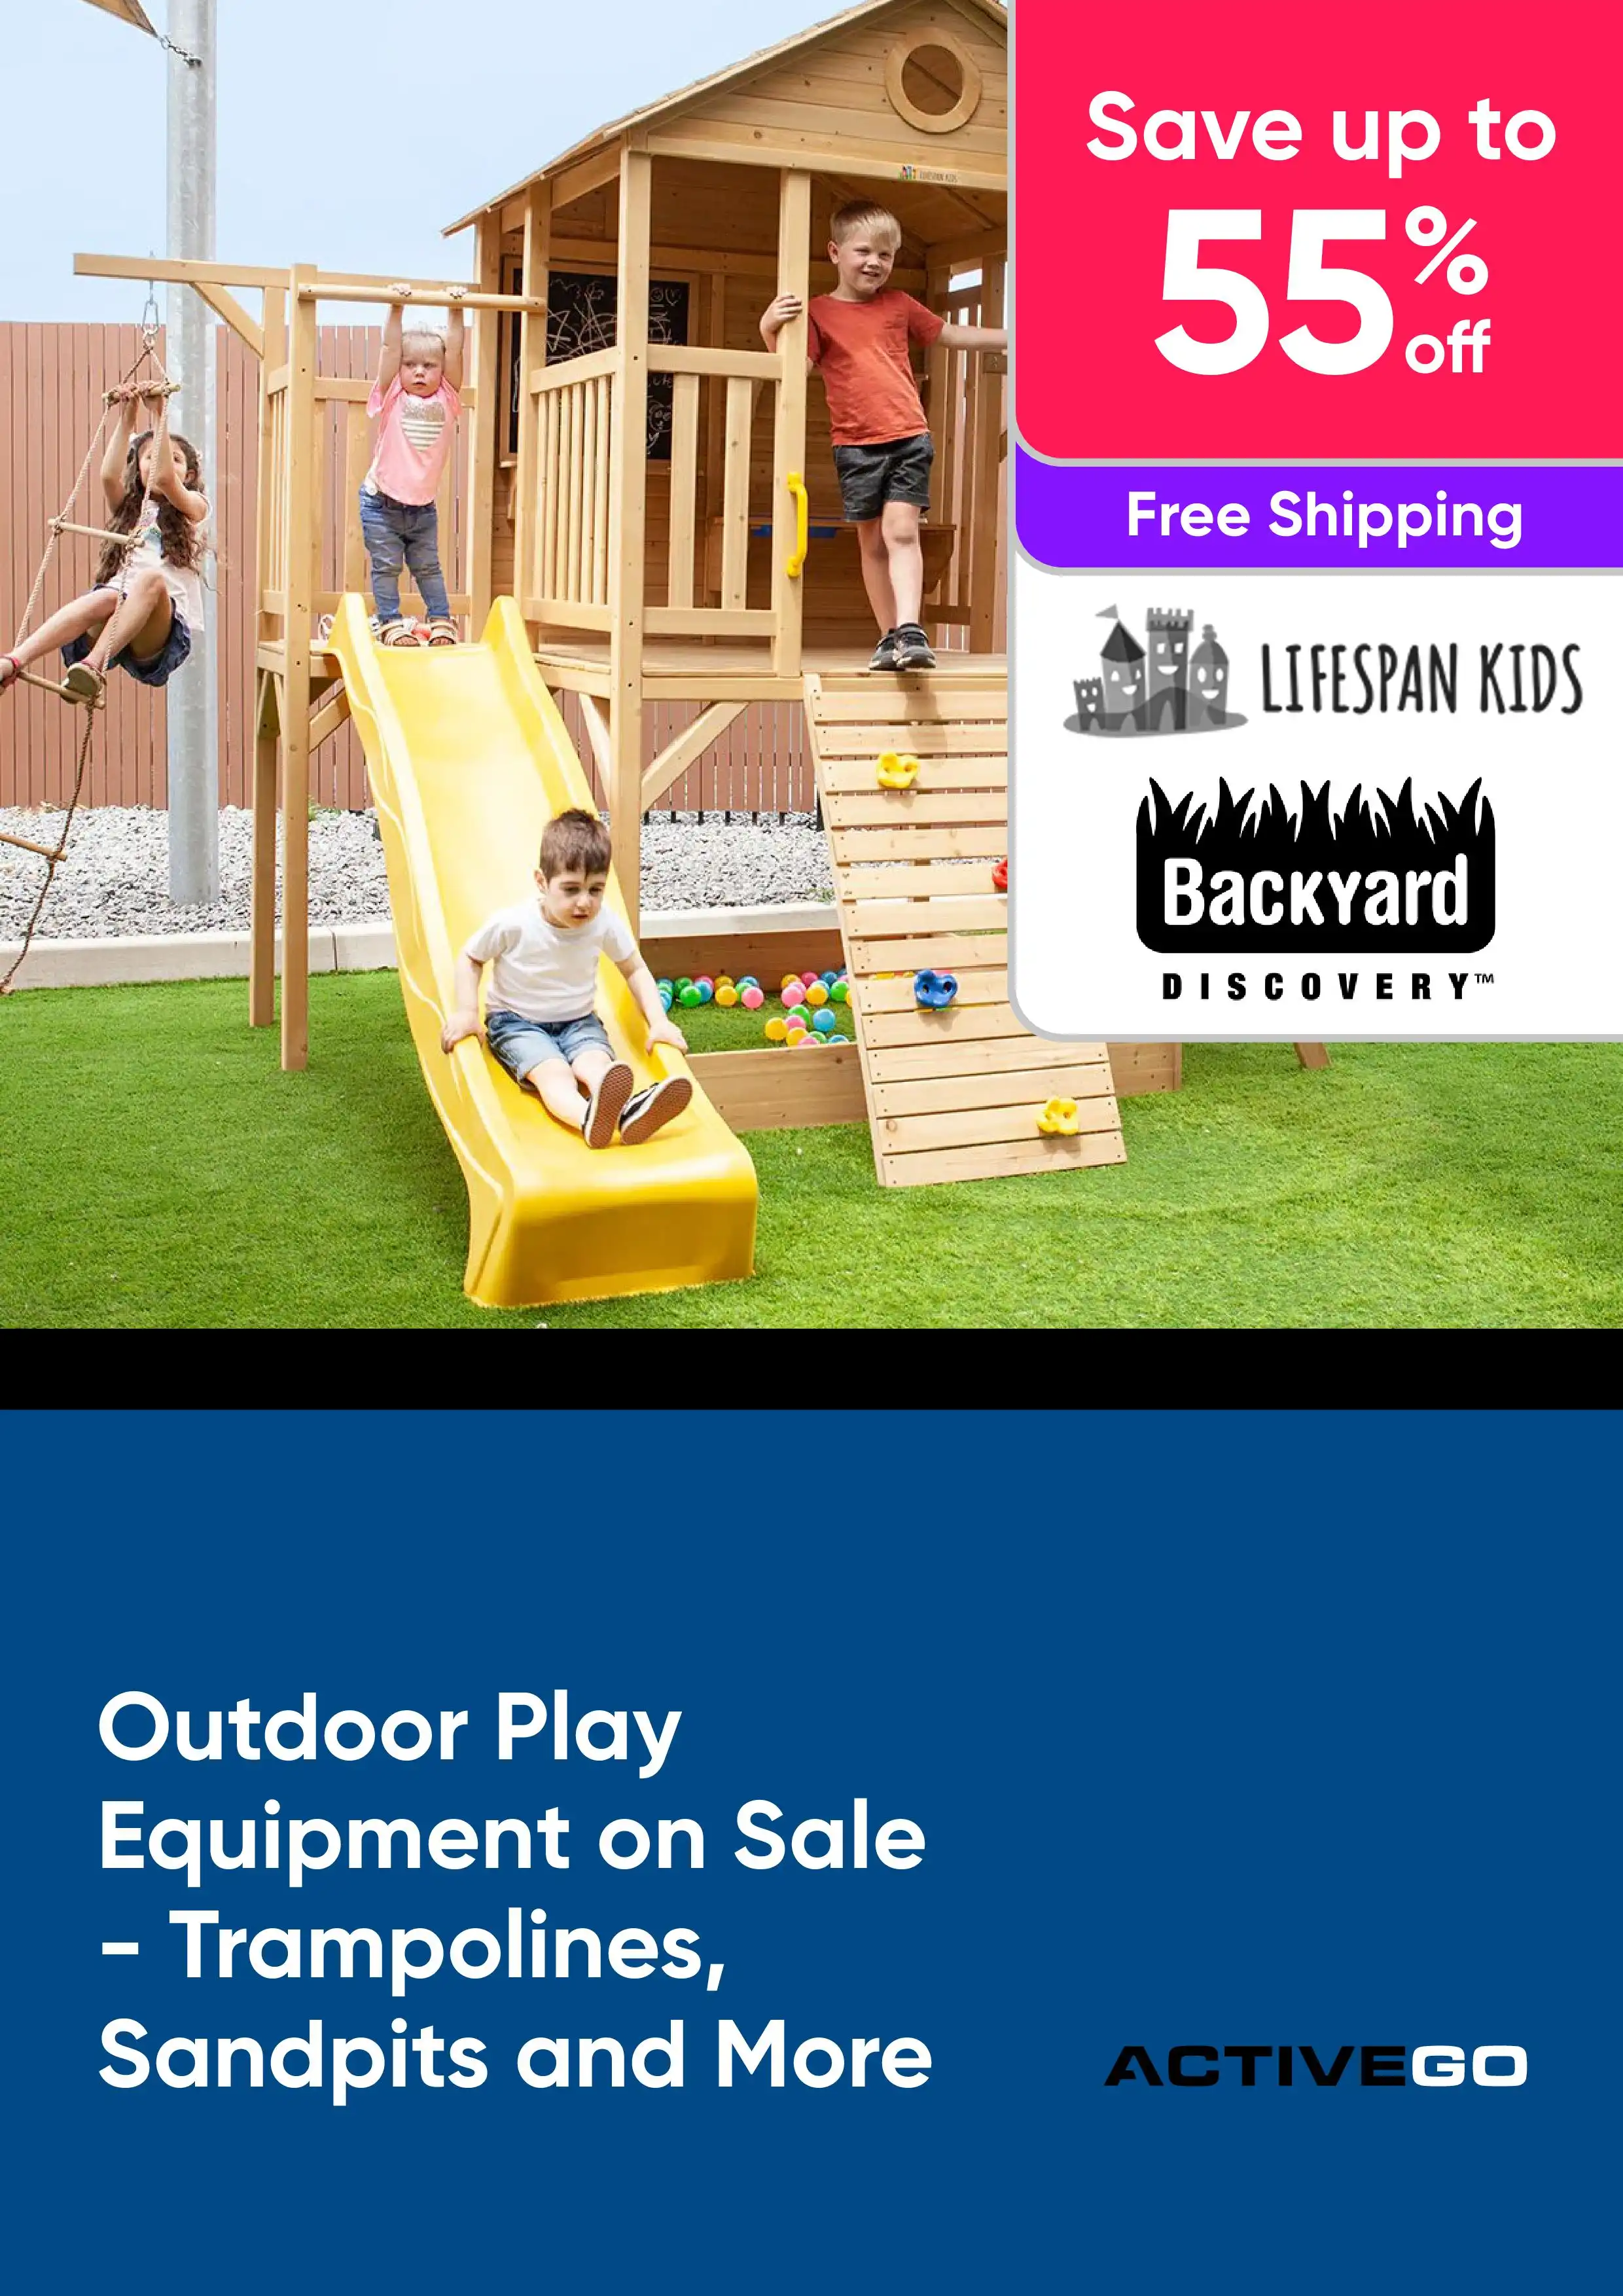 Outdoor Play Equipment on Sale - Trampolines, Sandpits and More - Save up to 55% off